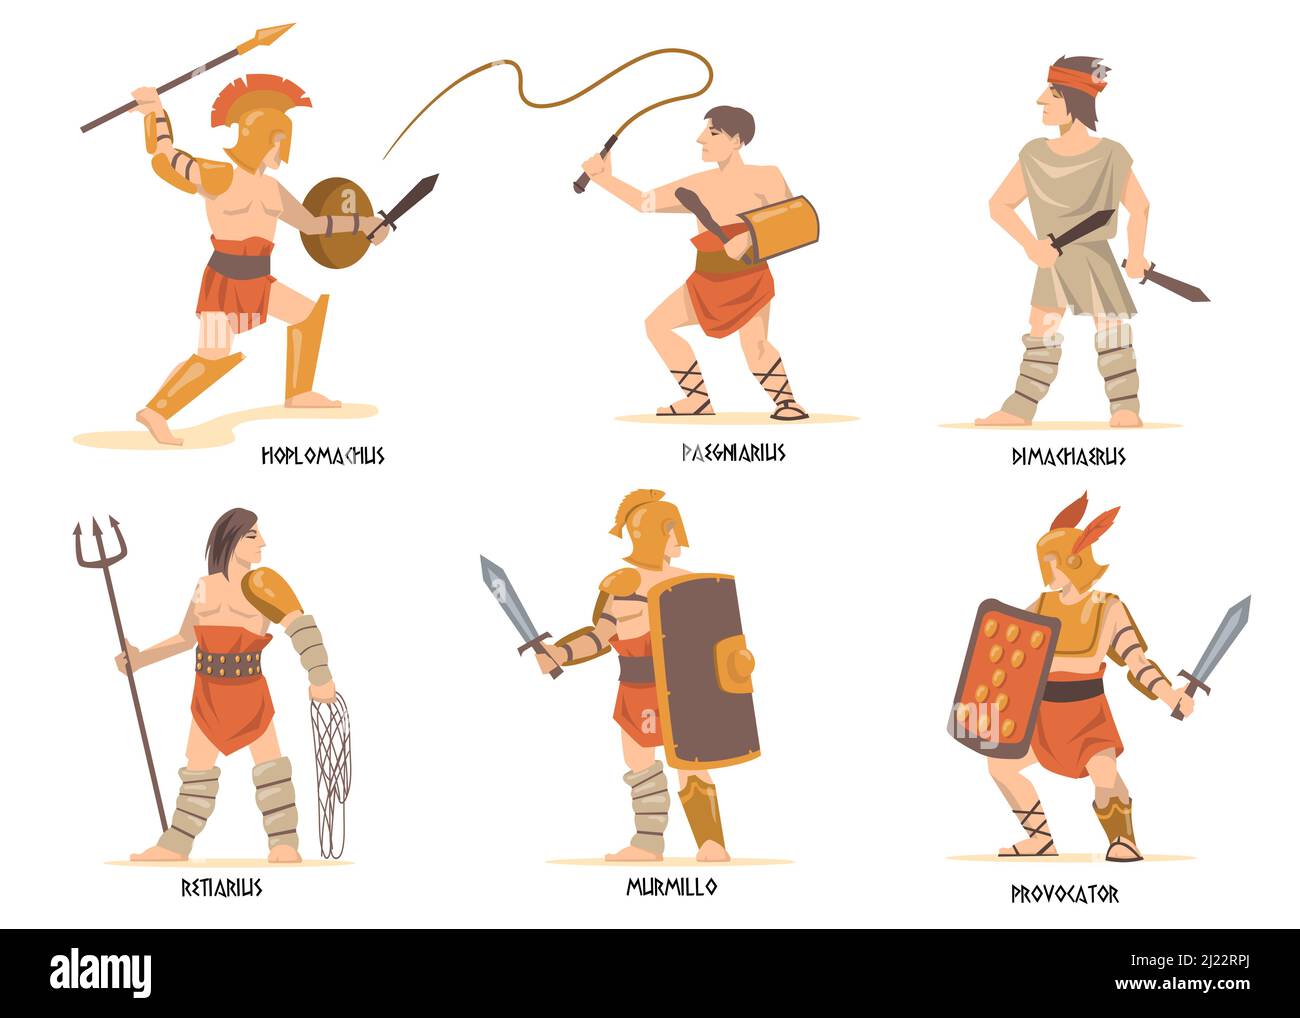 Gladiators characters set. Ancient Roman and Greek warriors, mythology characters, Spartan soldiers with swords and shields. Vector illustration for h Stock Vector